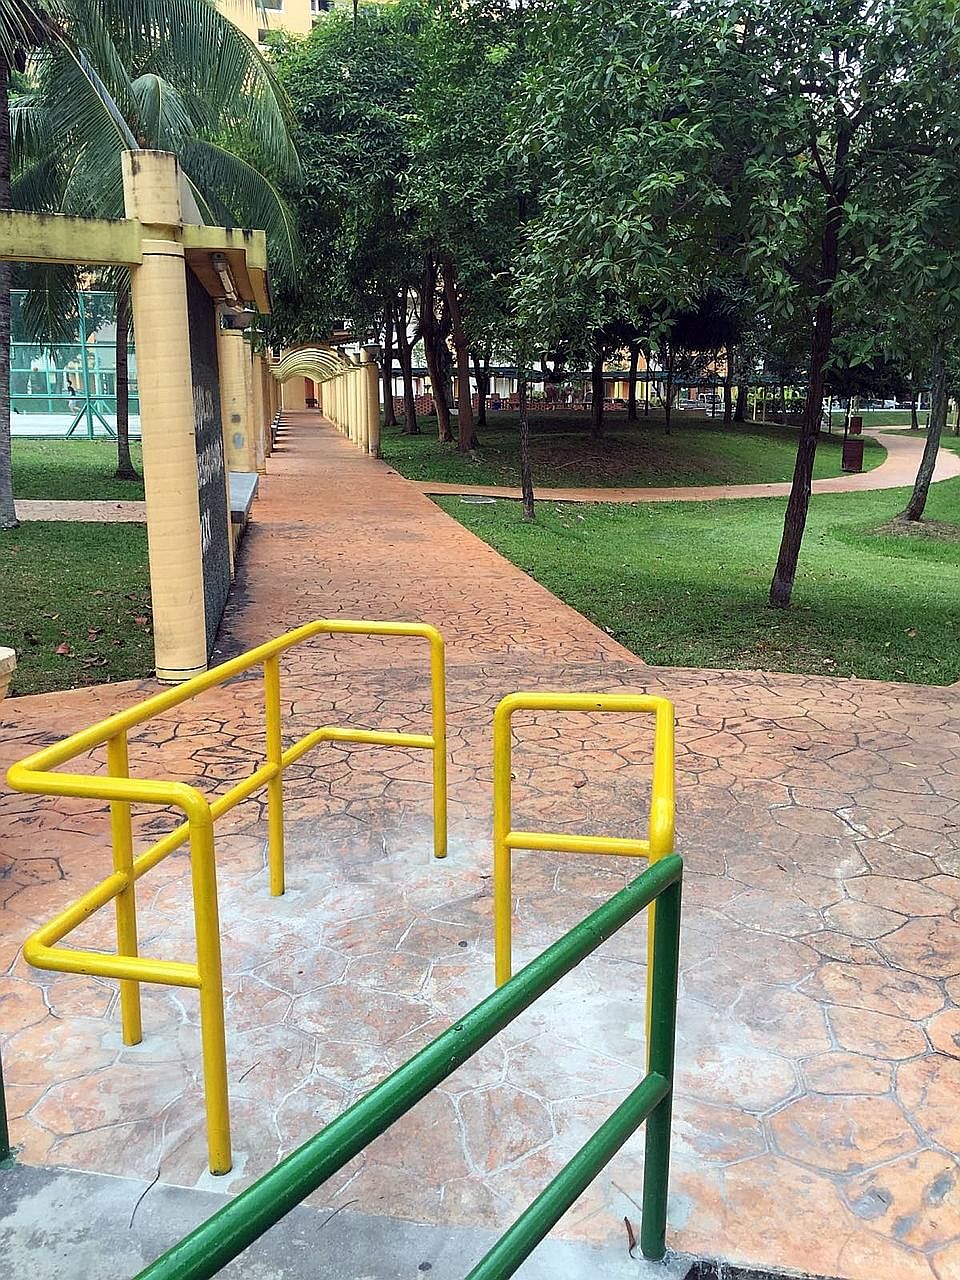 Railings were erected at Marsiling Drive last week to prevent motorcyclists from using the pedestrian footpath. However, they are an added obstacle to wheelchair users and those using mobility aids.